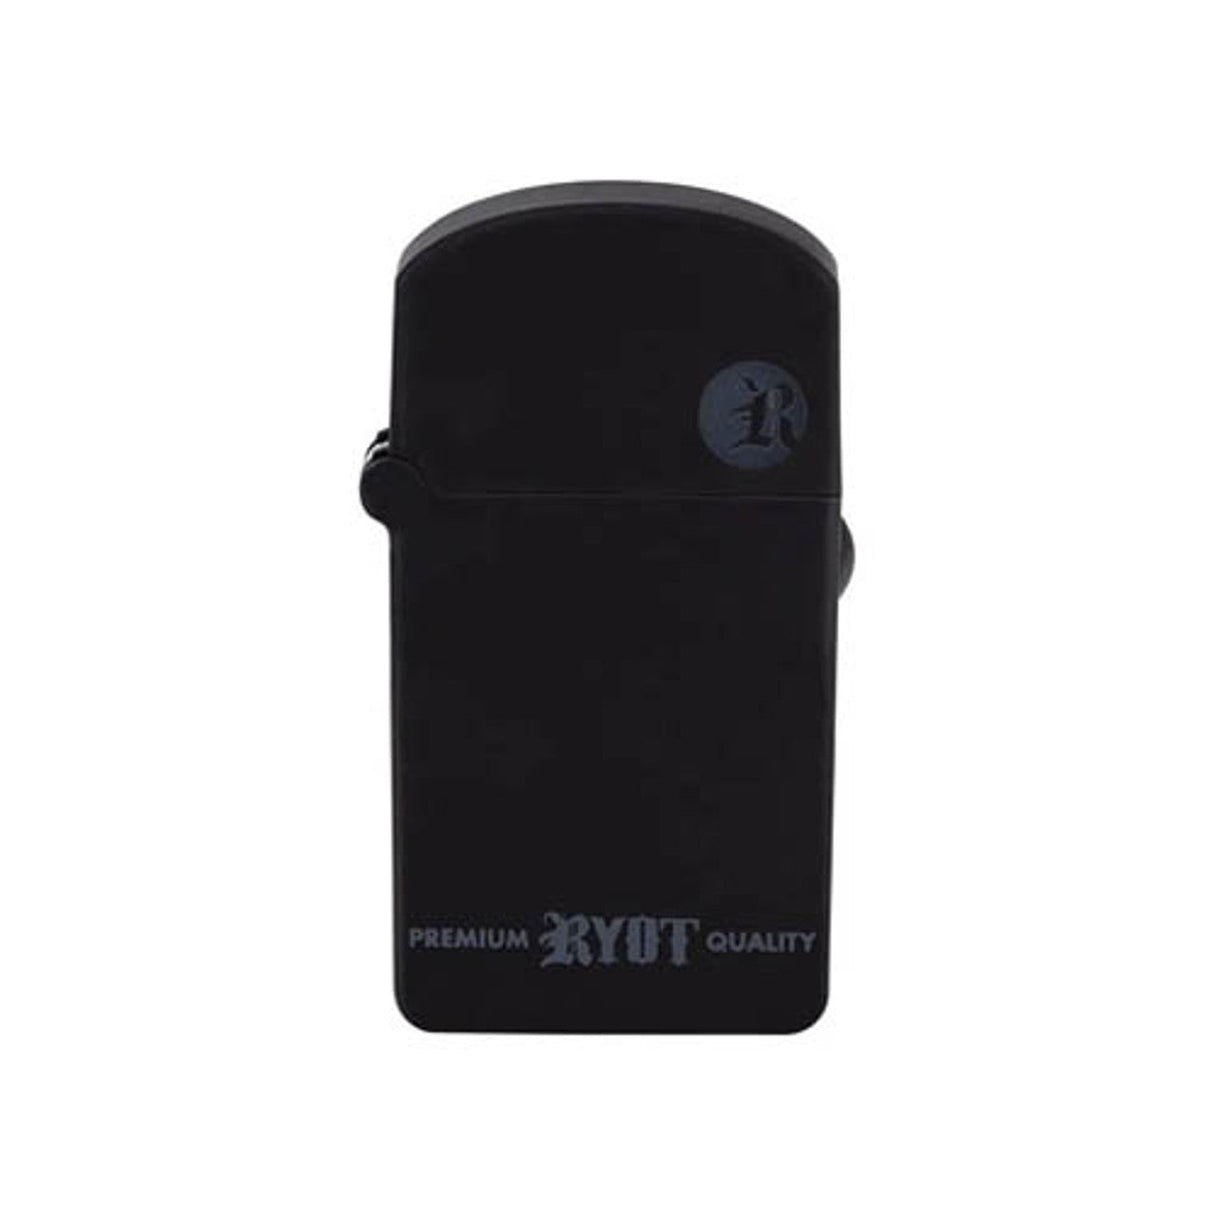 RYOT Verb 510 Oil Vape in Black - Front View with Discreet Design, Ideal for Concentrates